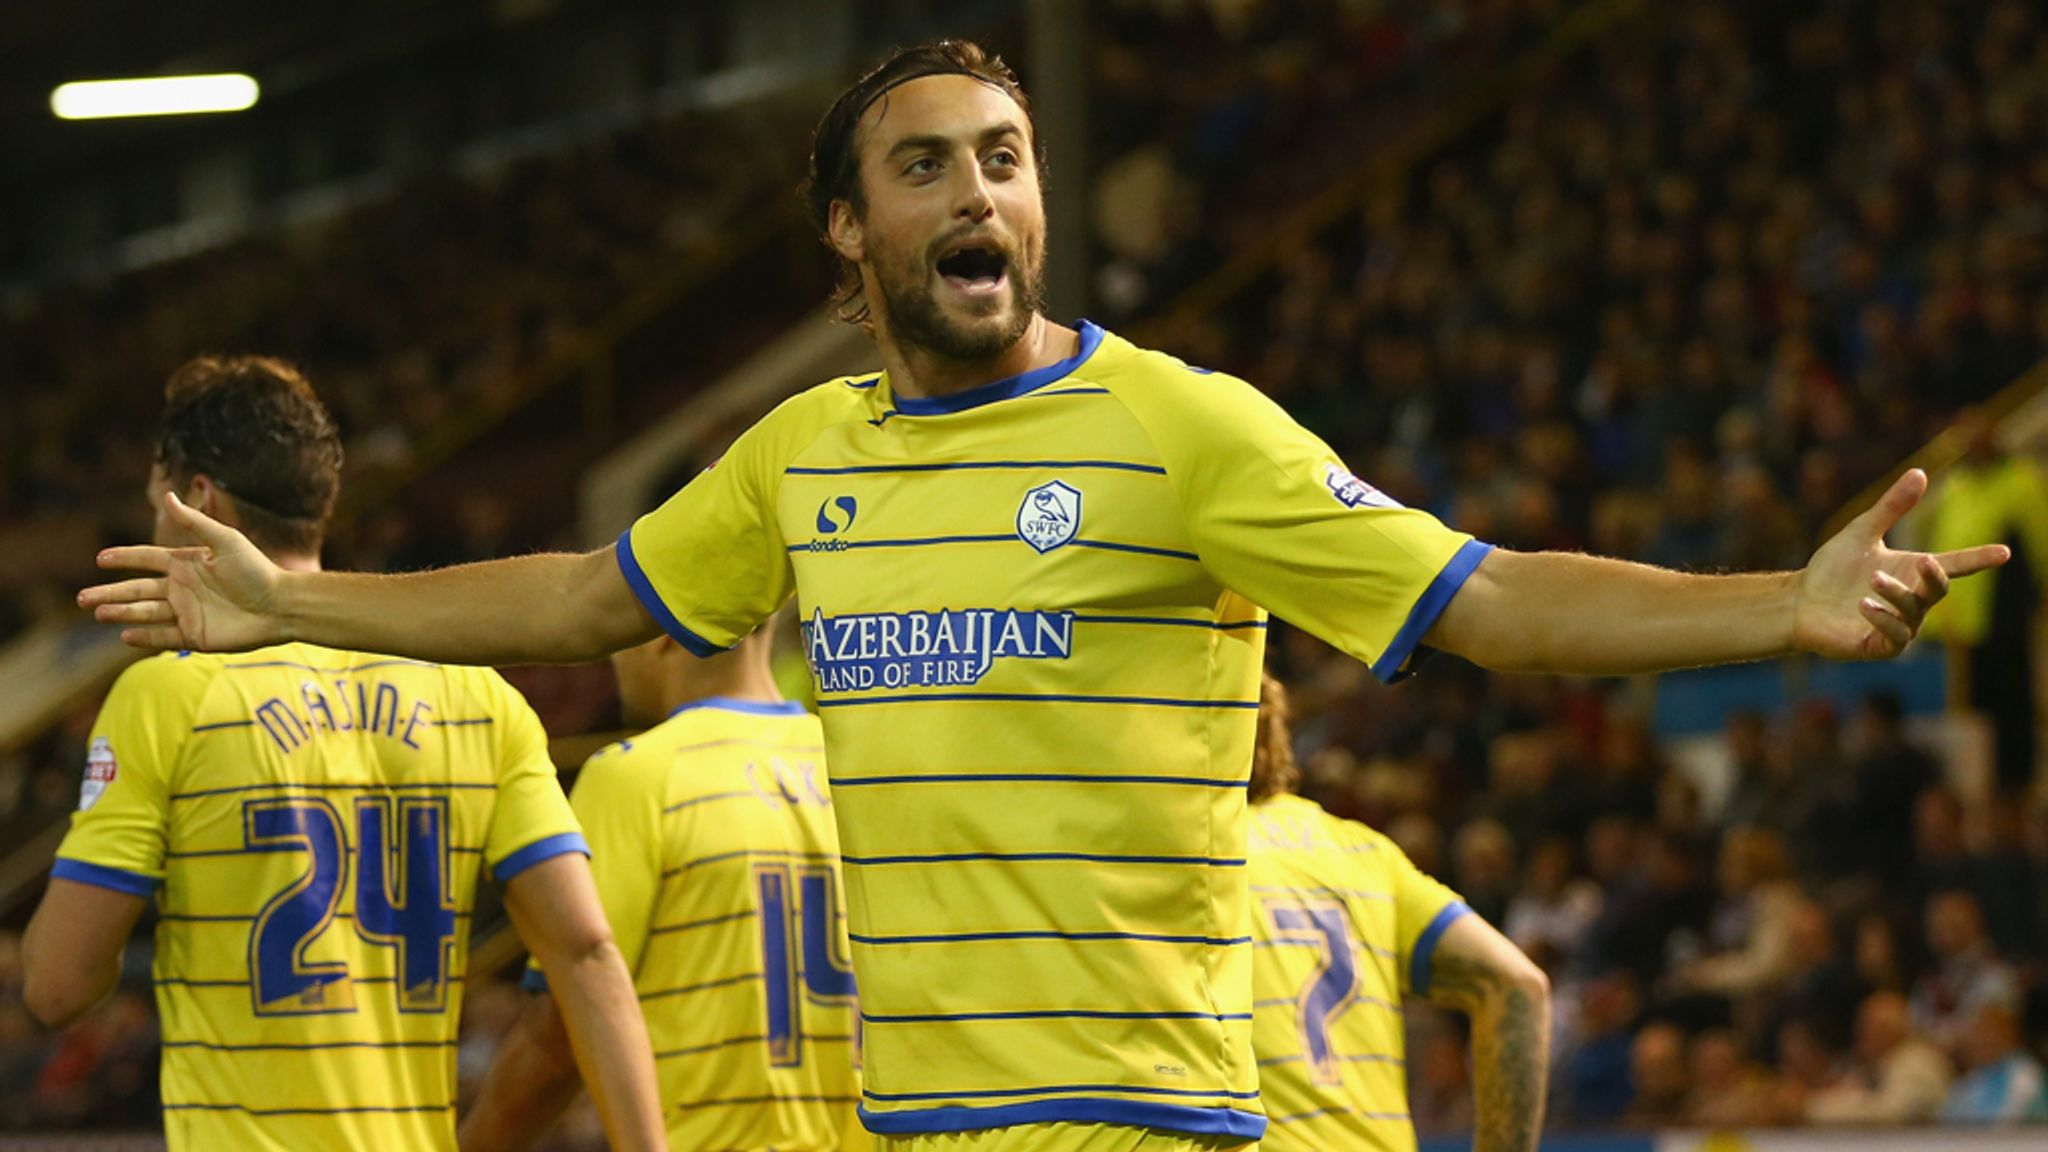 Sheffield Wednesdays Atdhe Nuhiu signs two-year contract extension Football News Sky Sports